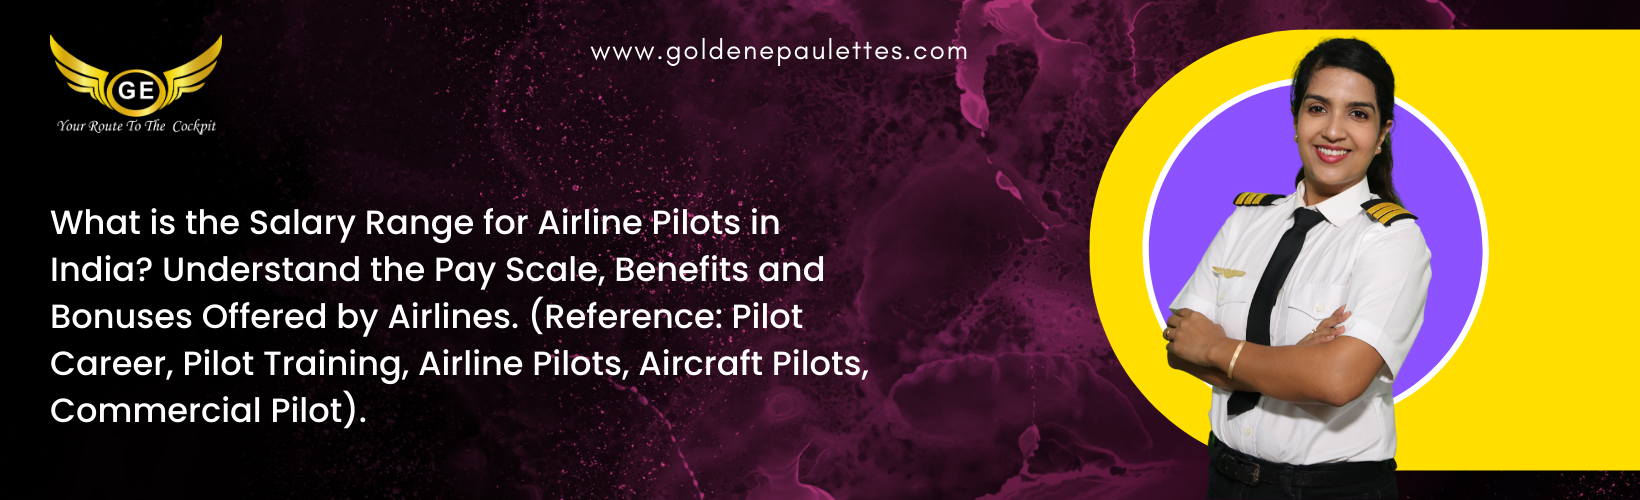 What is the Salary Range for Pilots in India